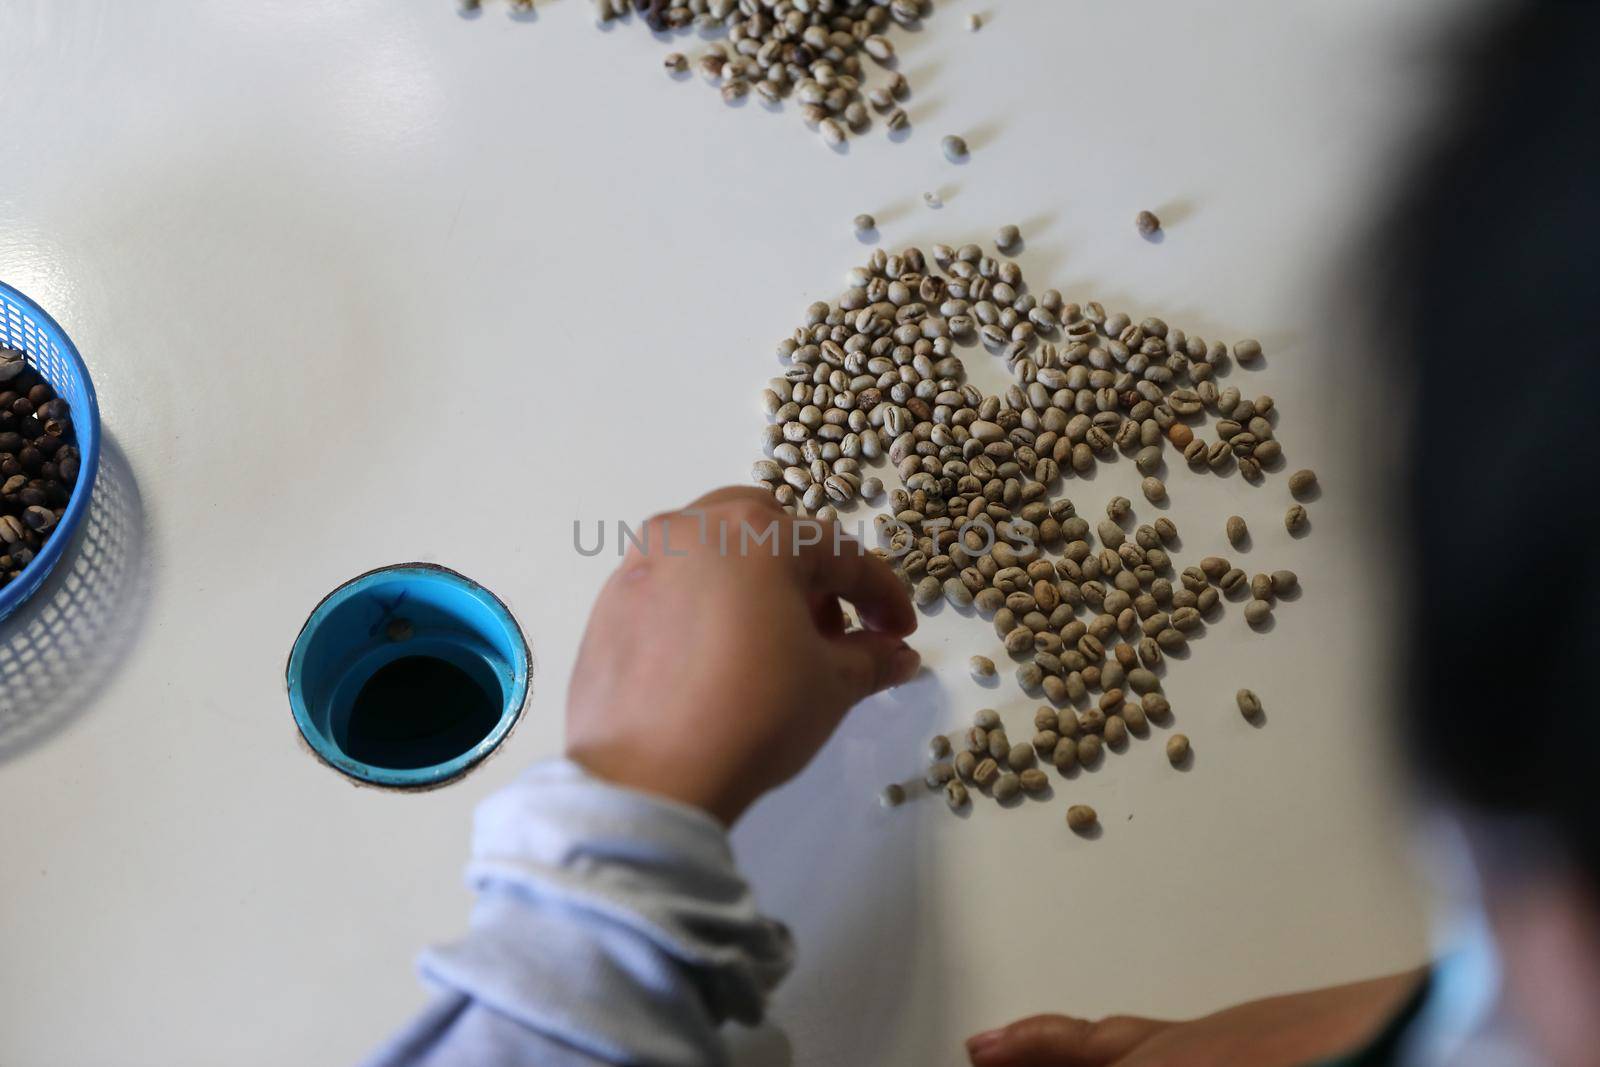 Workers Hands choosing coffee beans at coffee factory by piyato